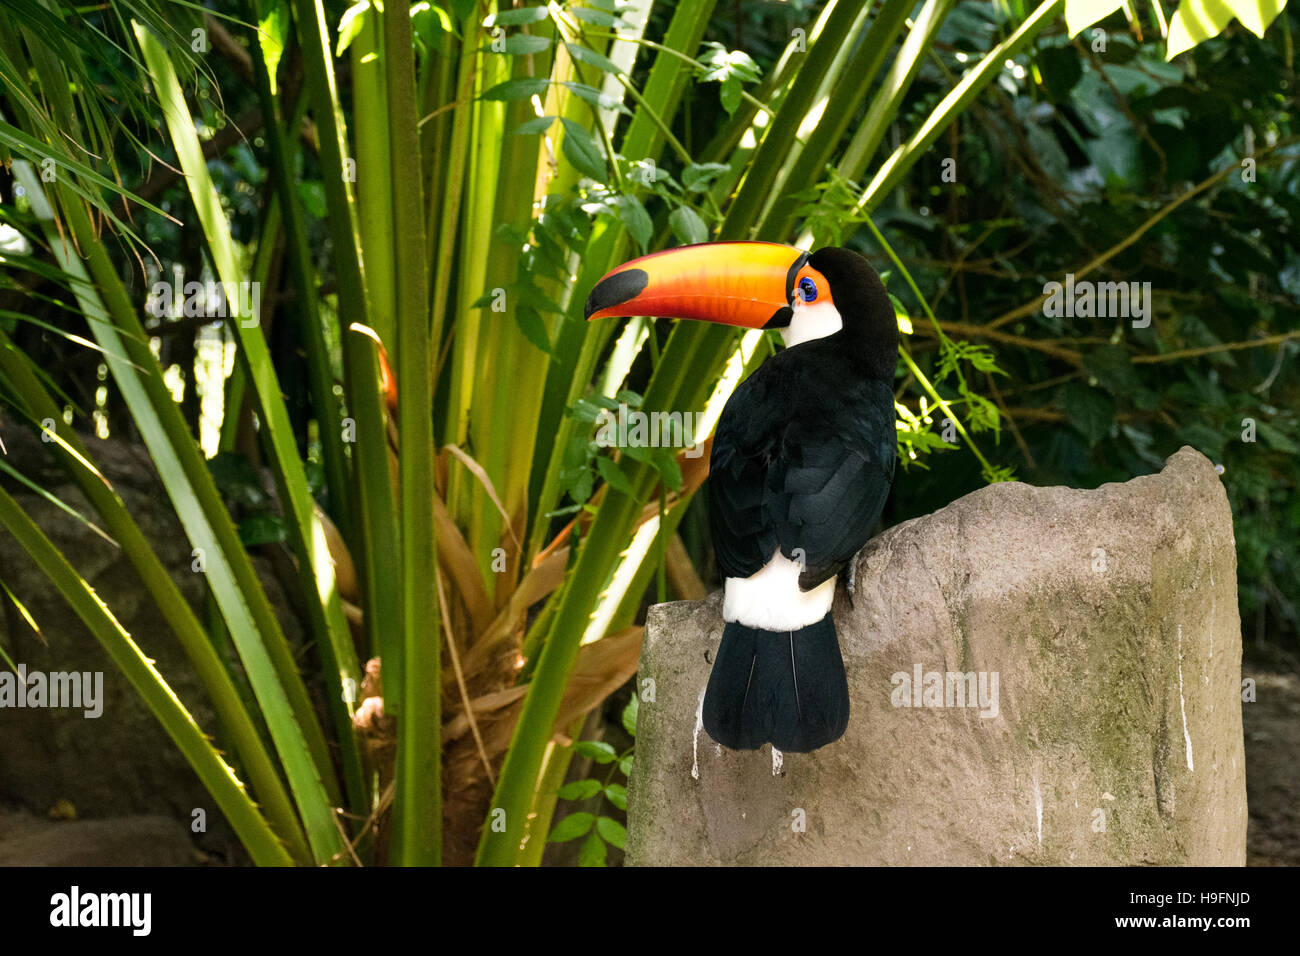 Toco toucan (Ramphastos toco) standing still over a rock Stock Photo